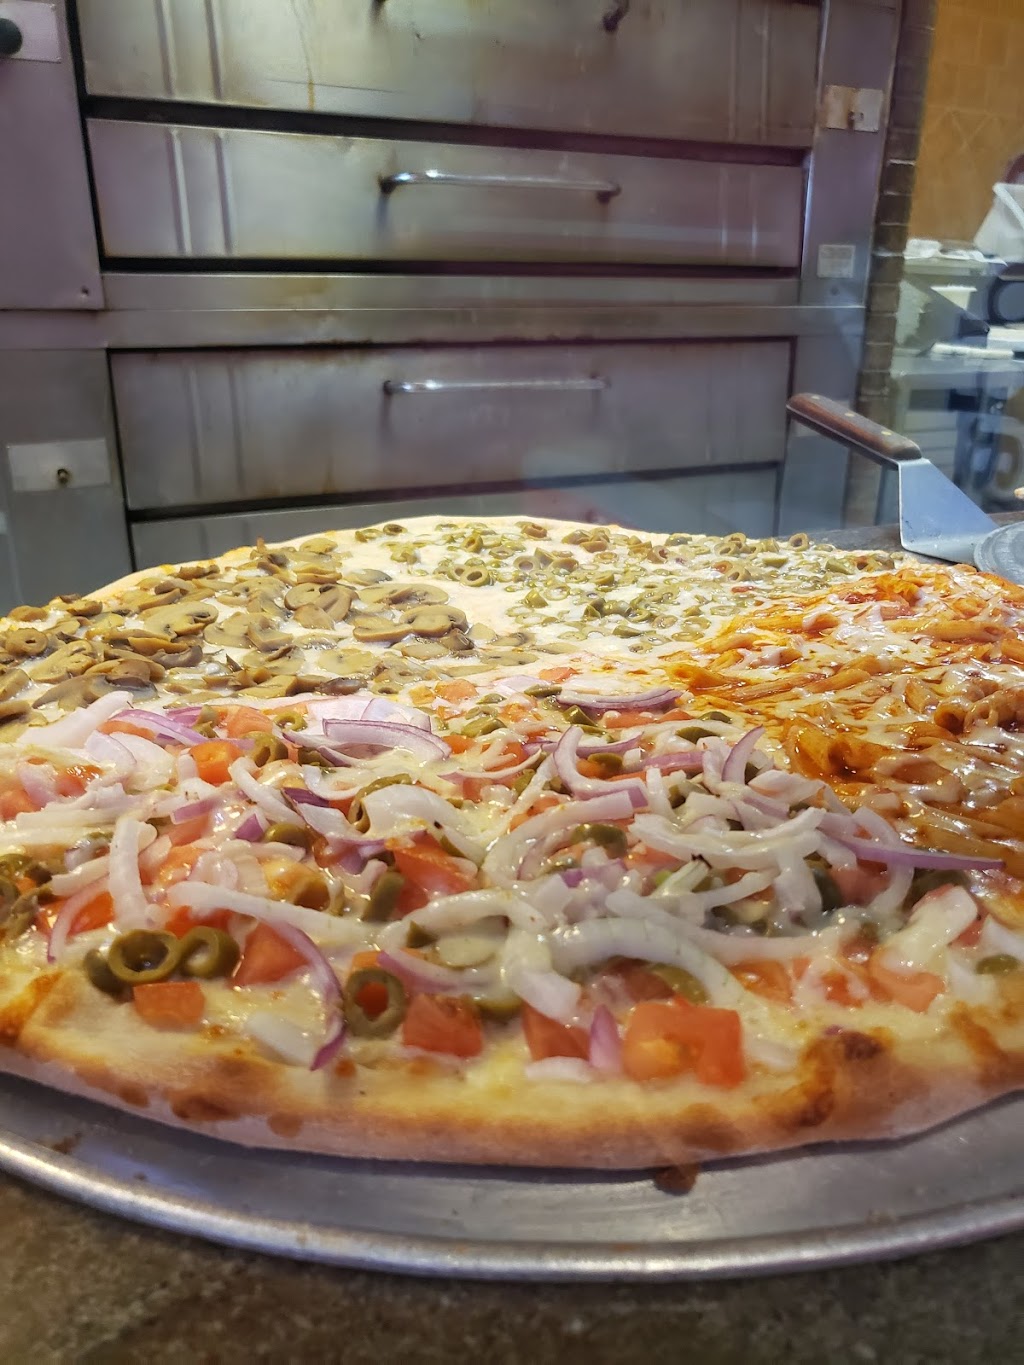 Shelis Pizza and Cafe | 126 Maple Ave, Spring Valley, NY 10977 | Phone: (845) 426-0105